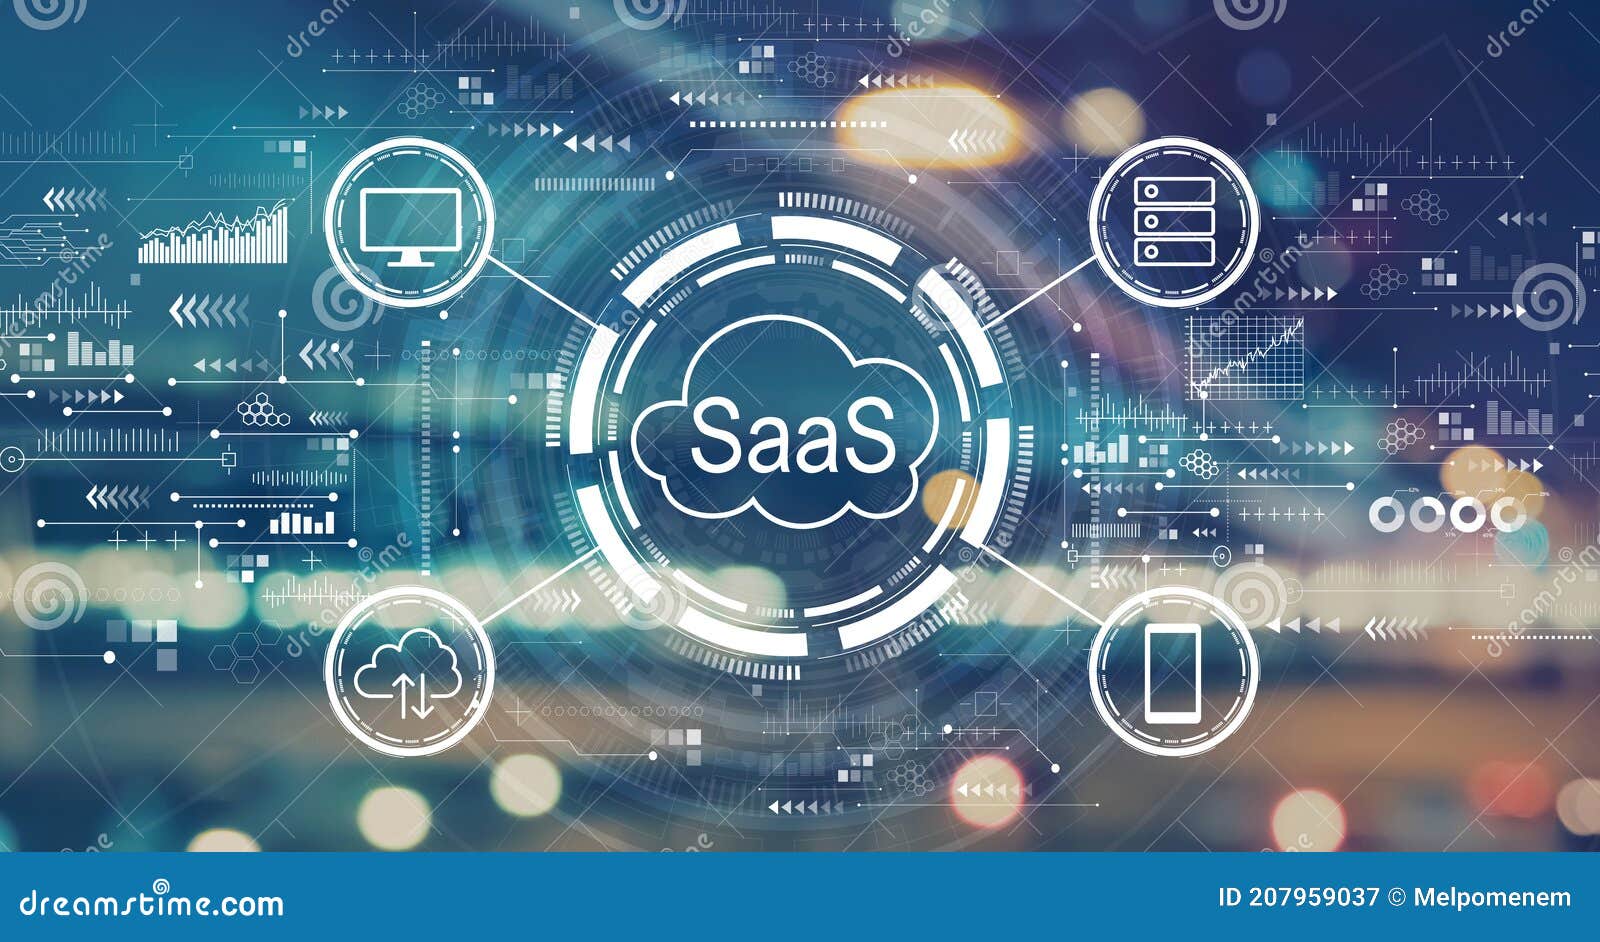 saas - software as a service concept with blurred city lights